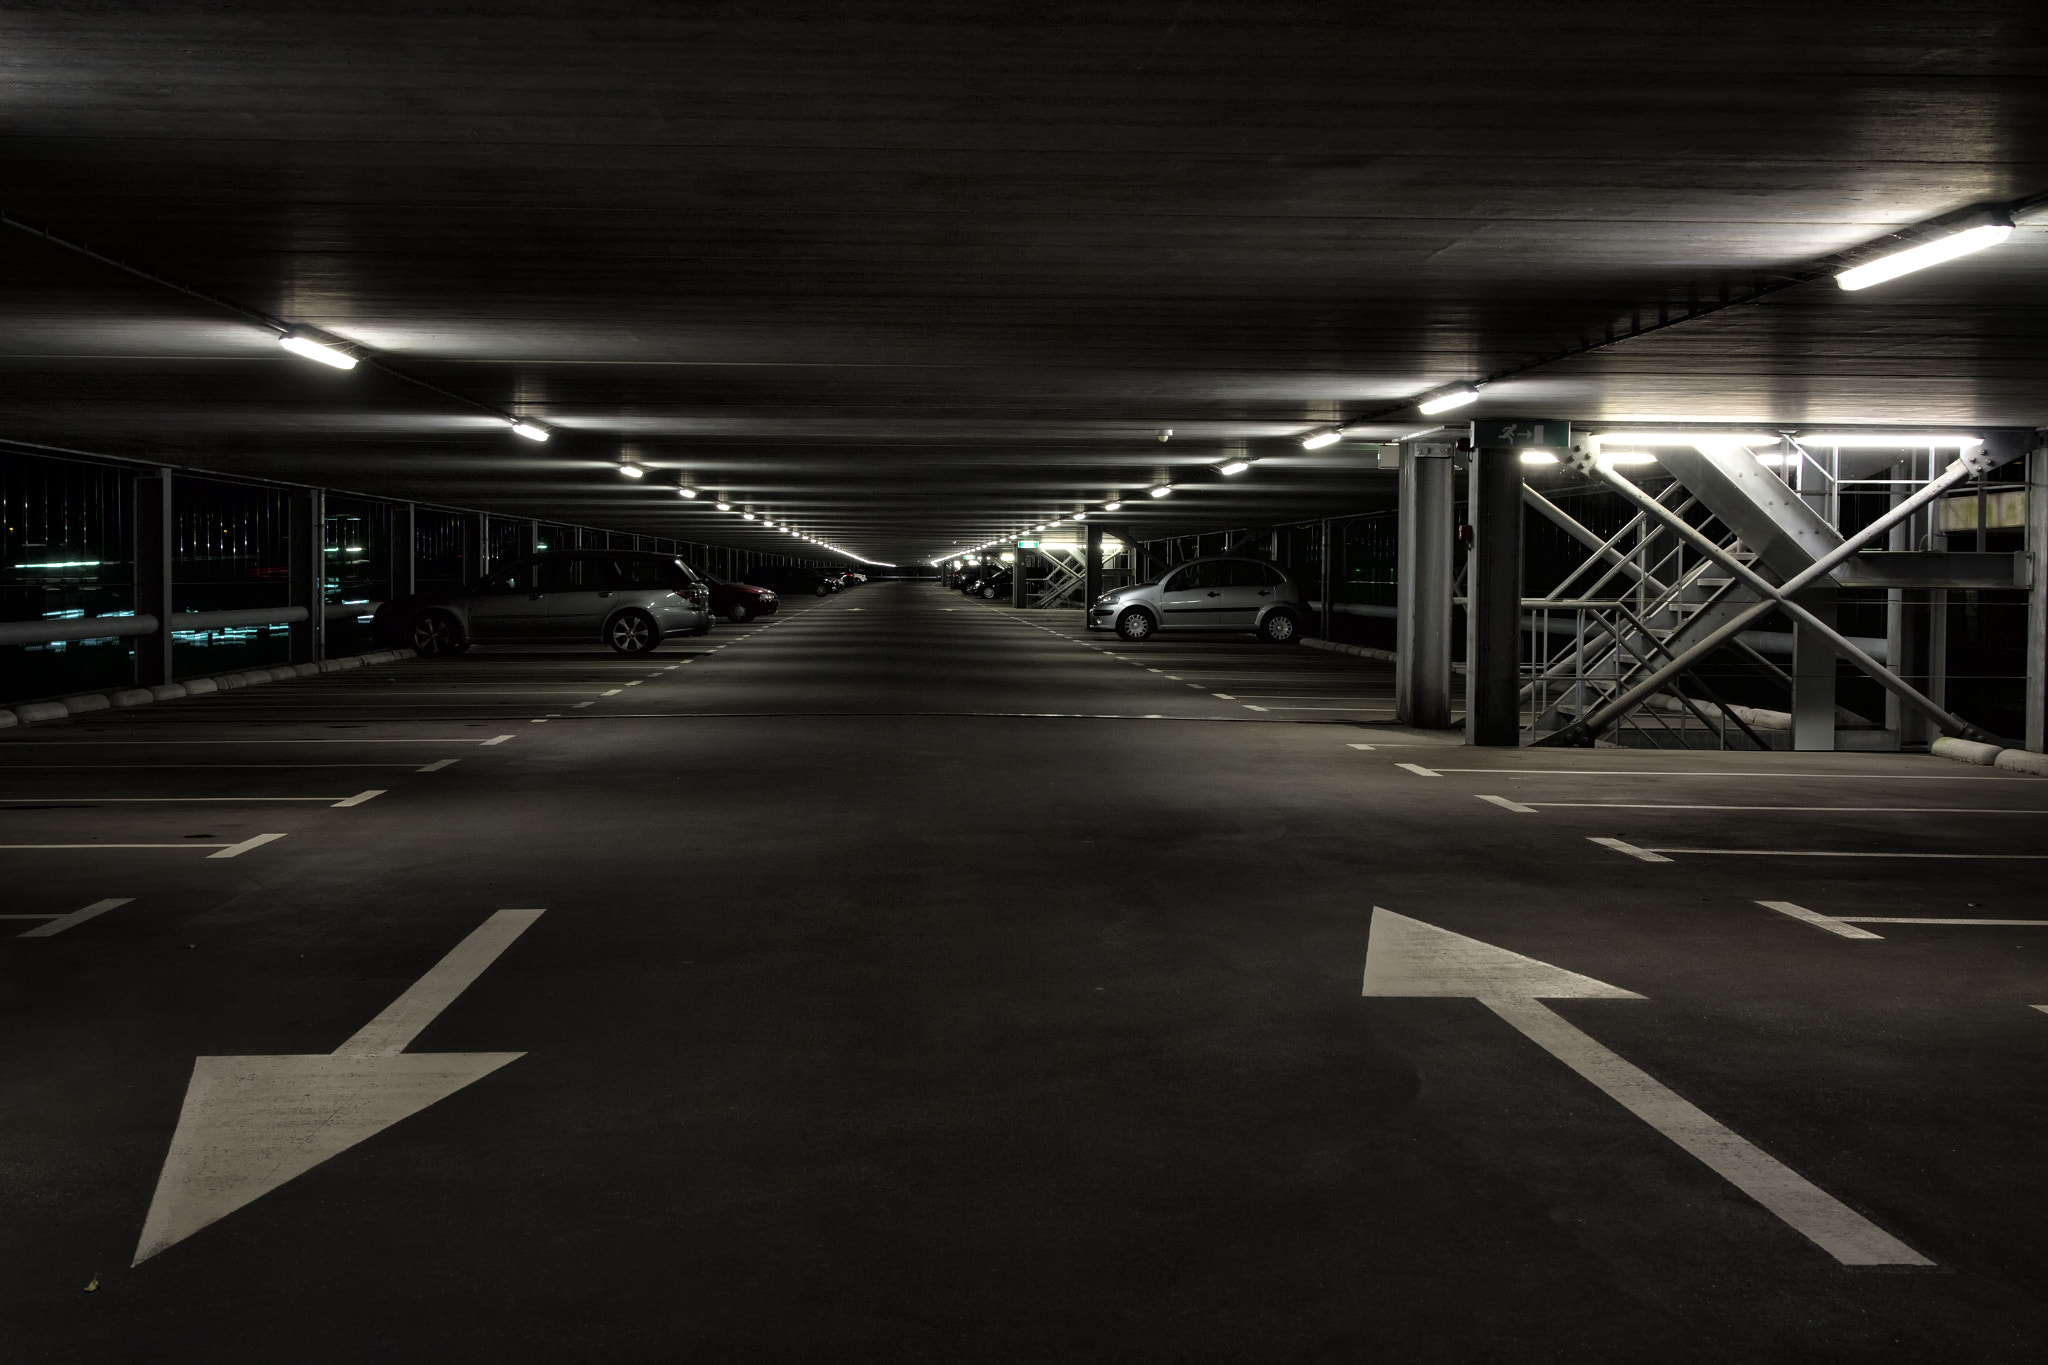 Canon EOS 70D + Sigma 24-105mm f/4 DG OS HSM | A sample photo. Dark parking lot photography